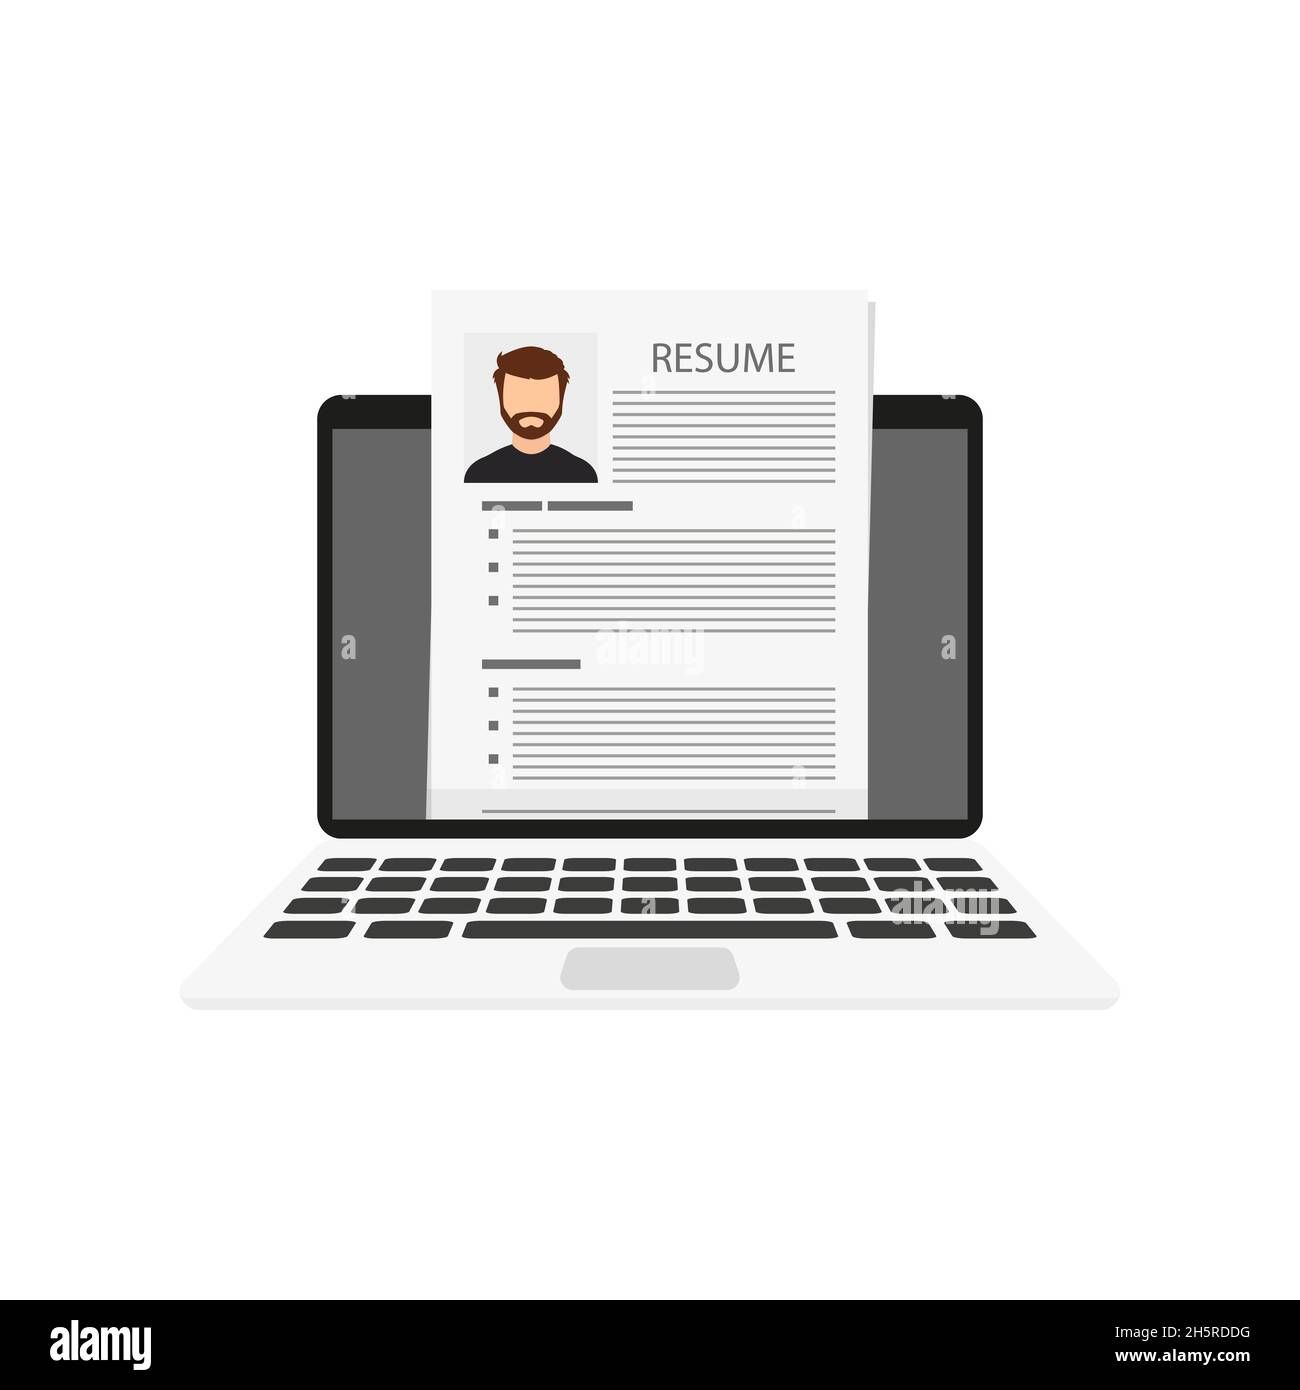 Flat design template with resume on laptop, vector illustration Stock Vector